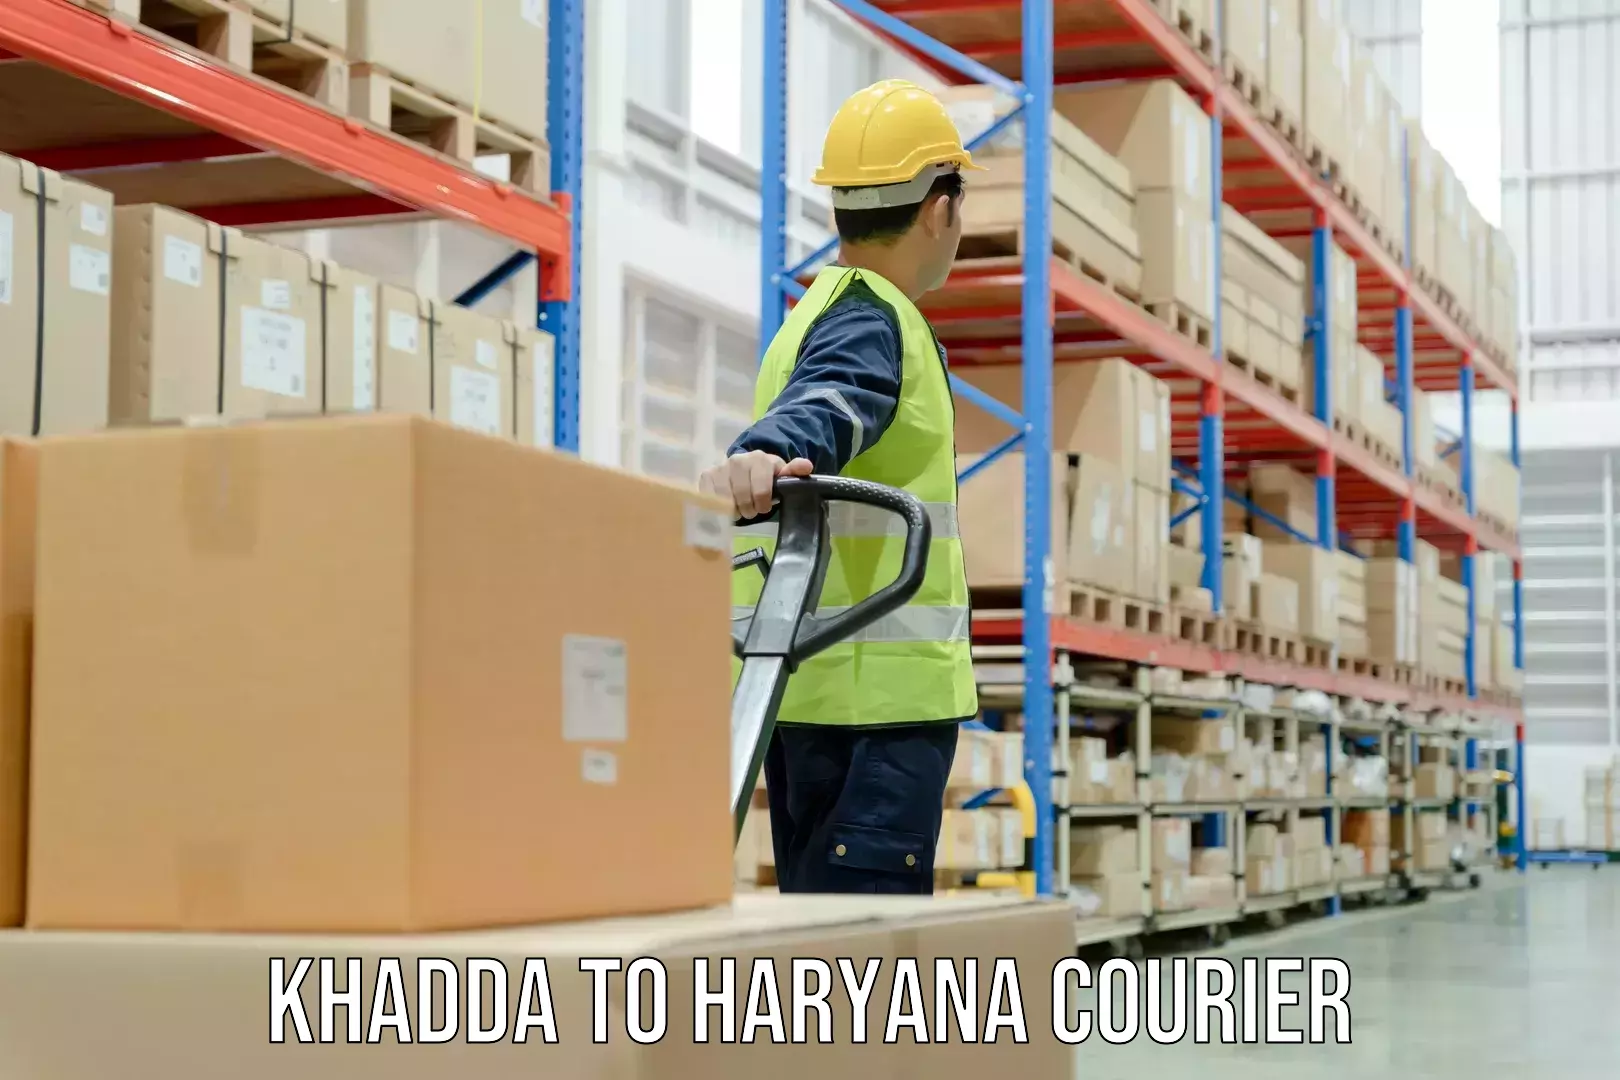 Full-service courier options Khadda to Pinjore